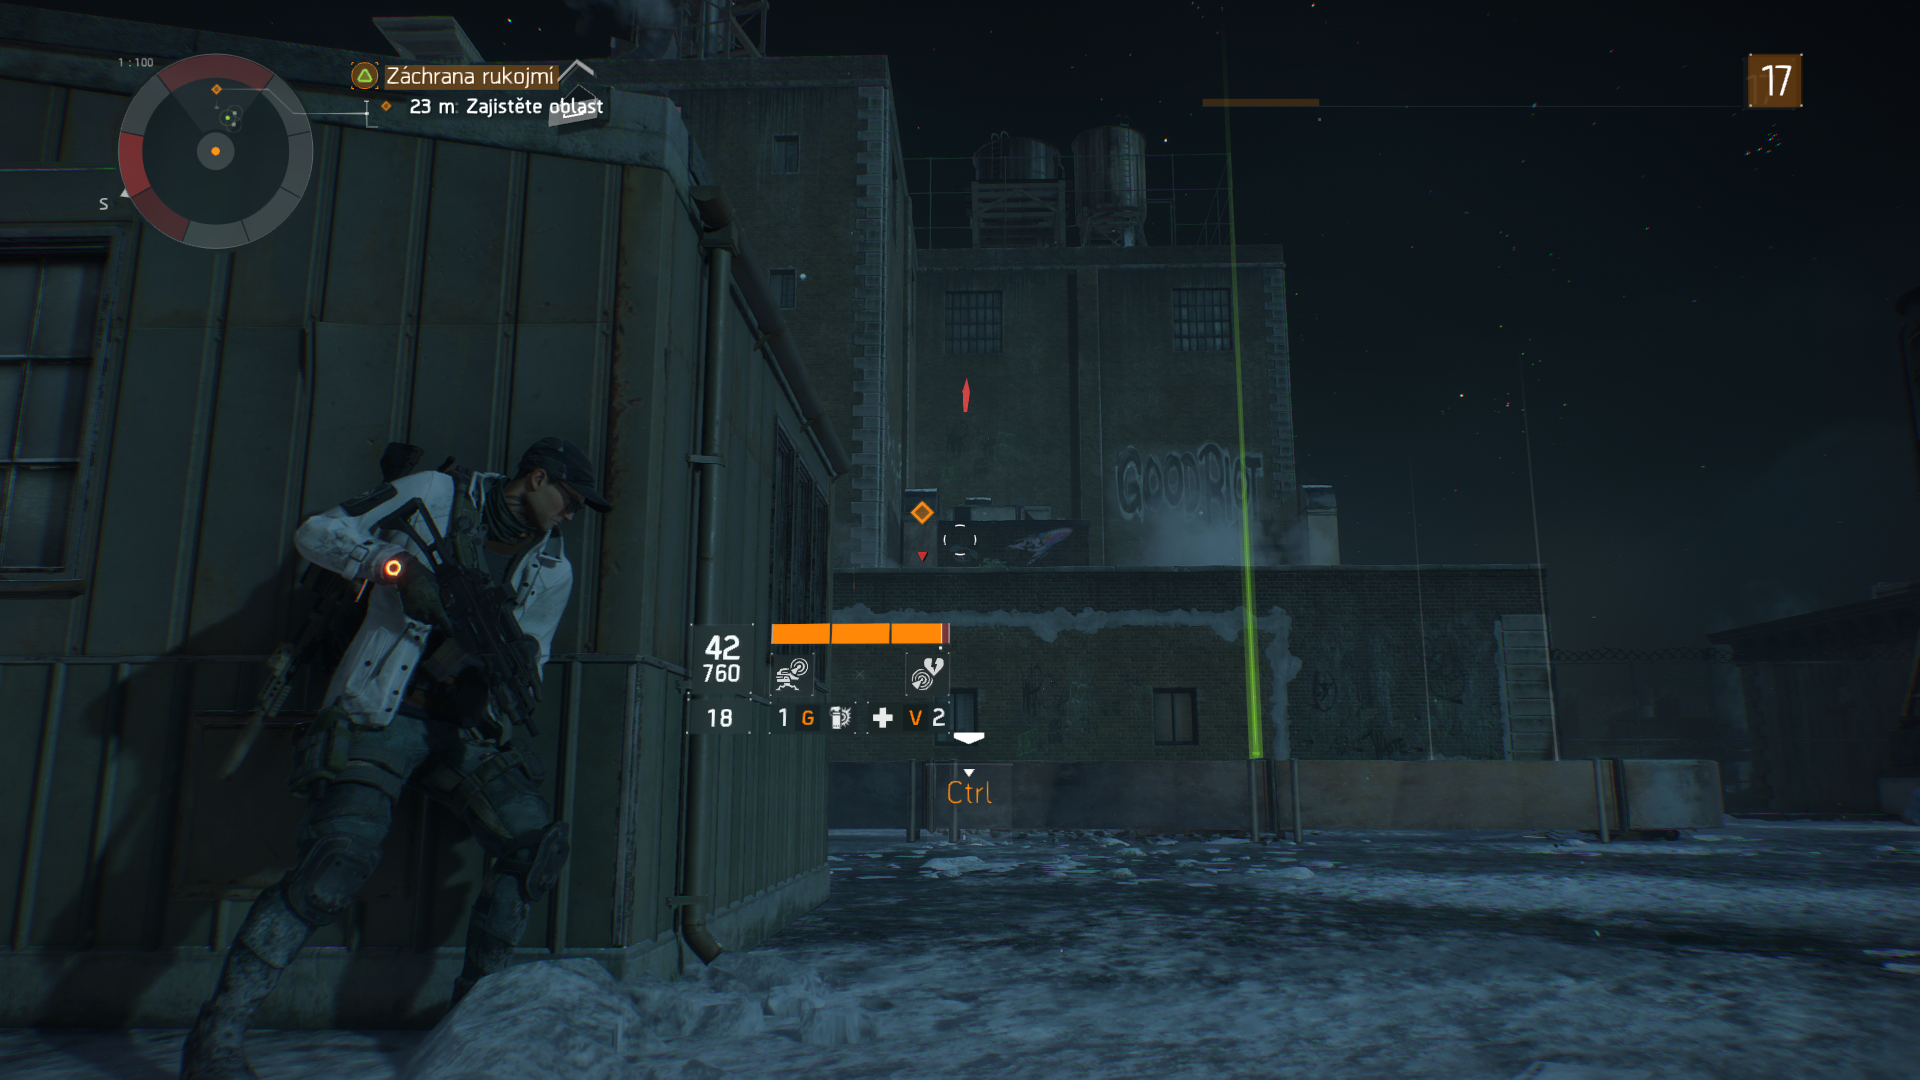 Tom Clancy’s The Division™